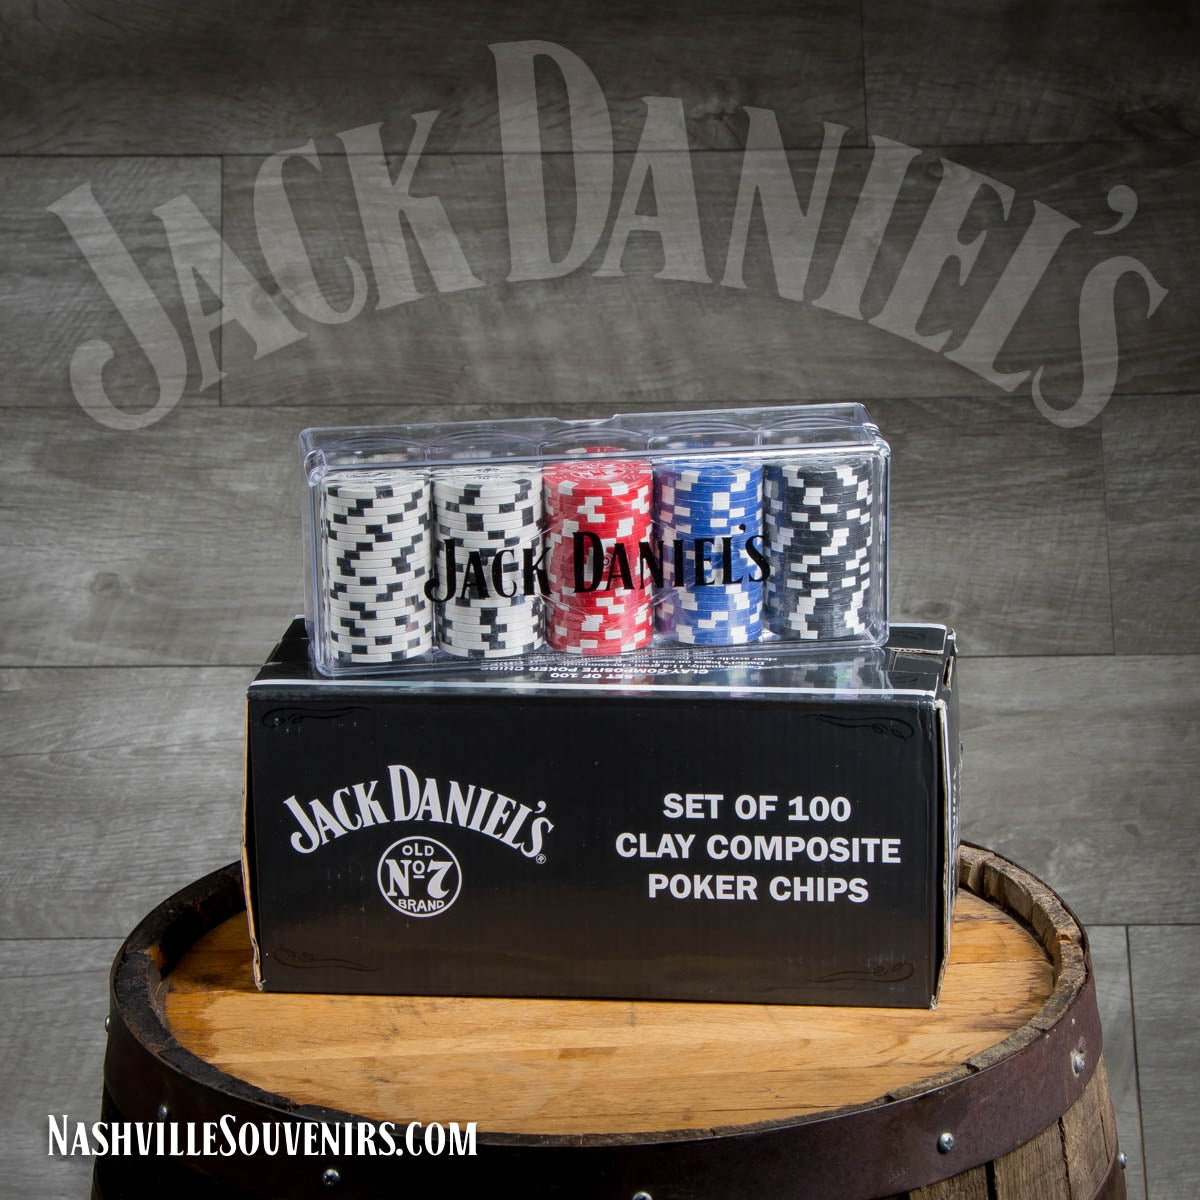 Officially licensed Jack Daniels Clay Poker Chips (100) with Acrylic Case.  FREE SHIPPING on all US orders over $75!